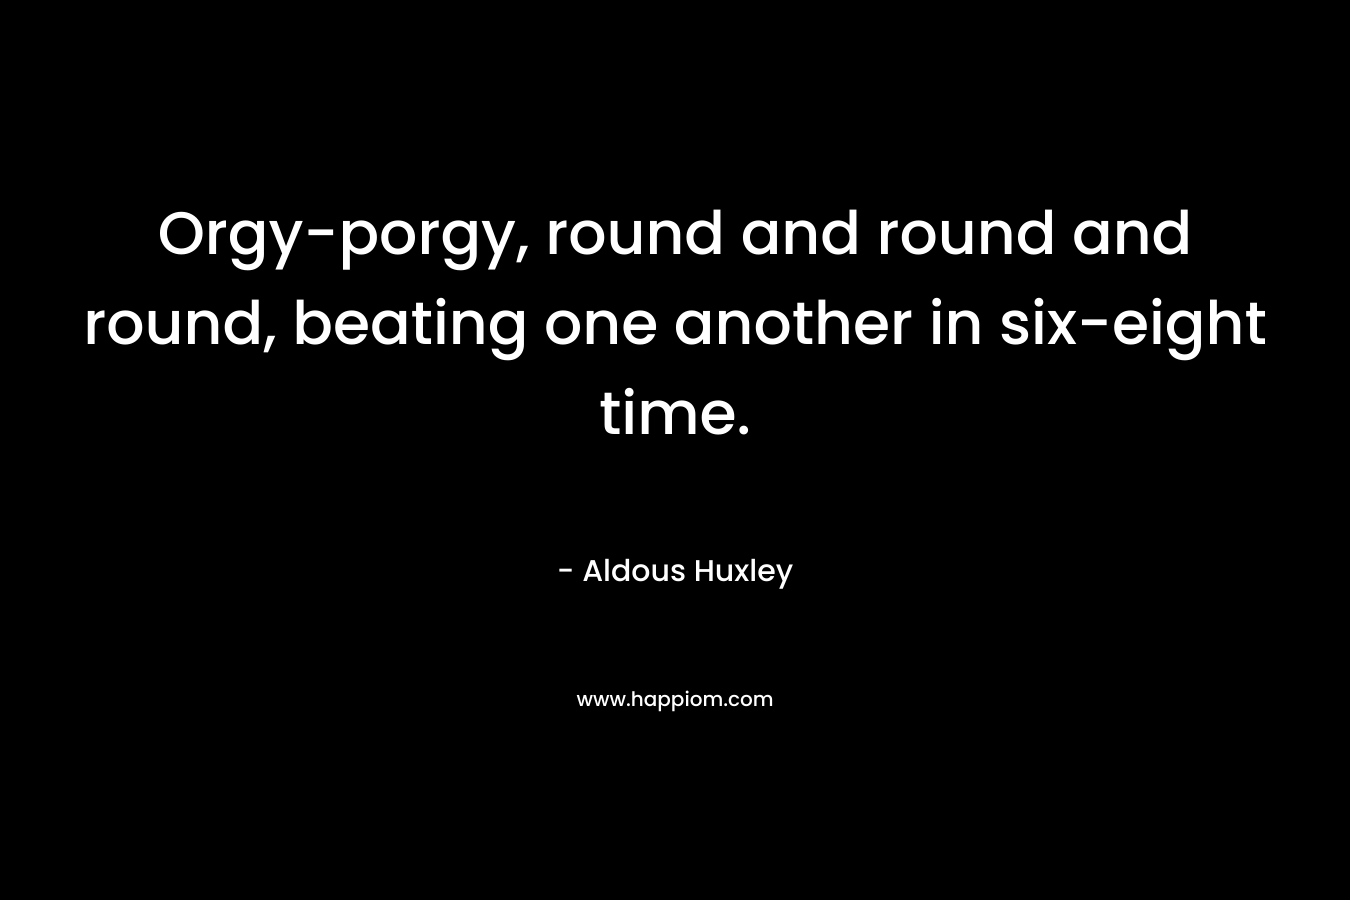 Orgy-porgy, round and round and round, beating one another in six-eight time.